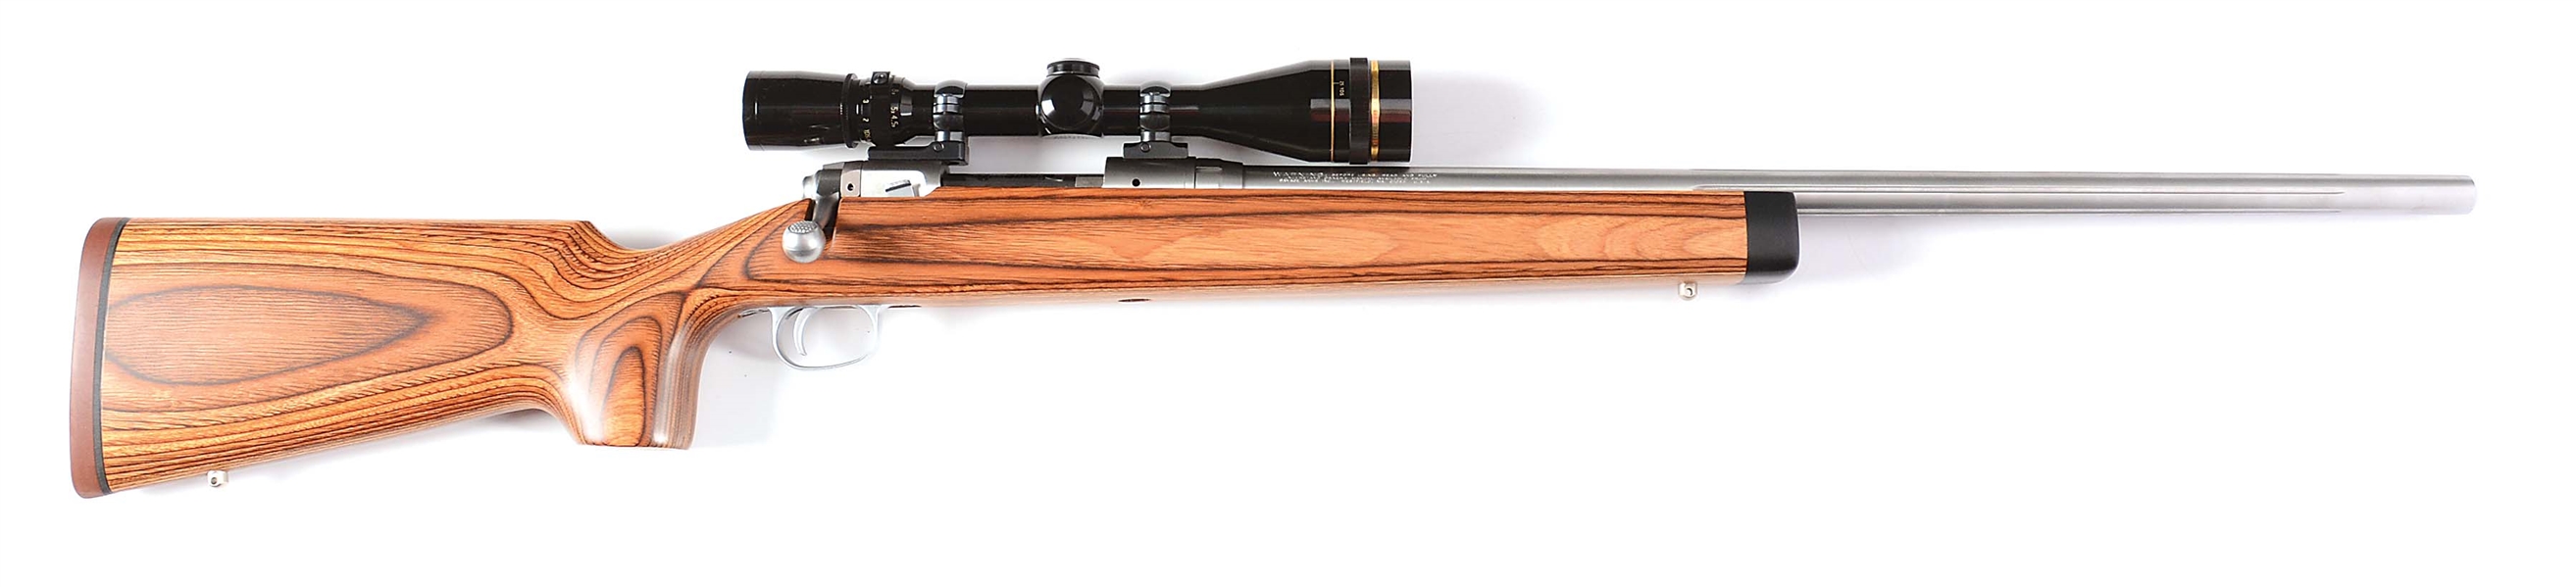 (M) SAVAGE ARMS MODEL 12 BOLT ACTION RIFLE WITH MOUNTED SCOPE.